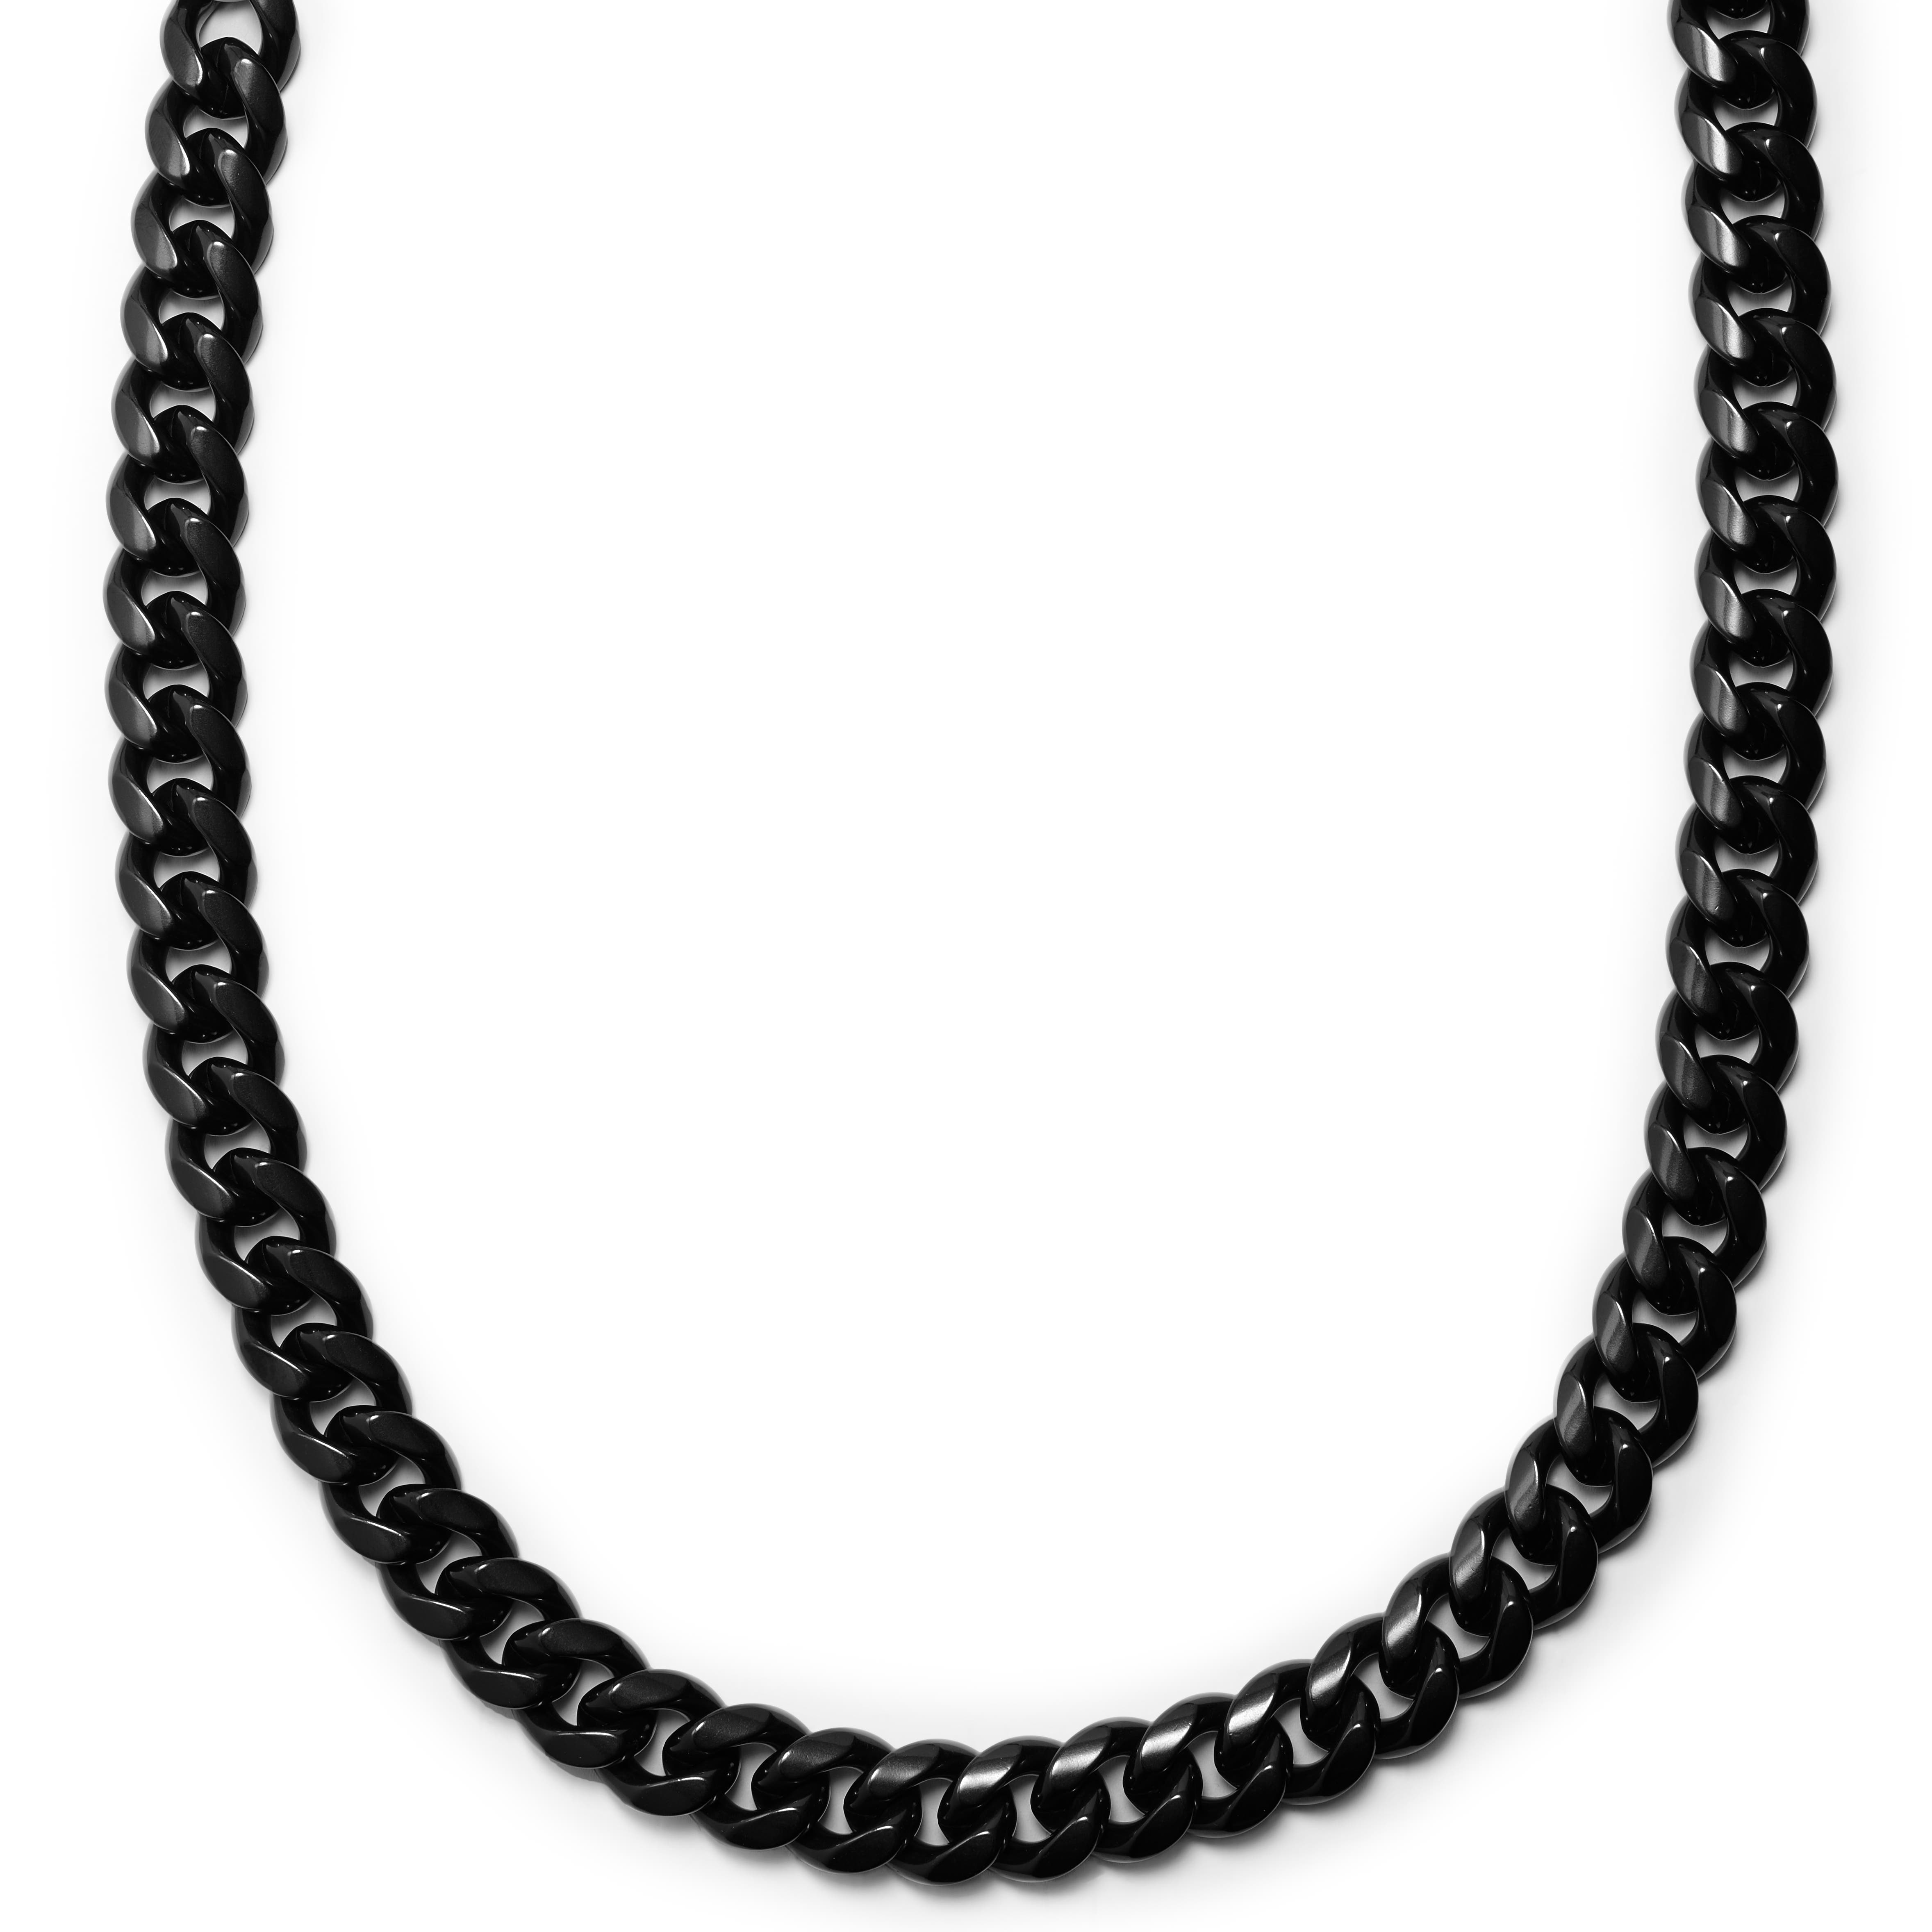 16 mm Black Stainless Cuban Chain Steel Necklace